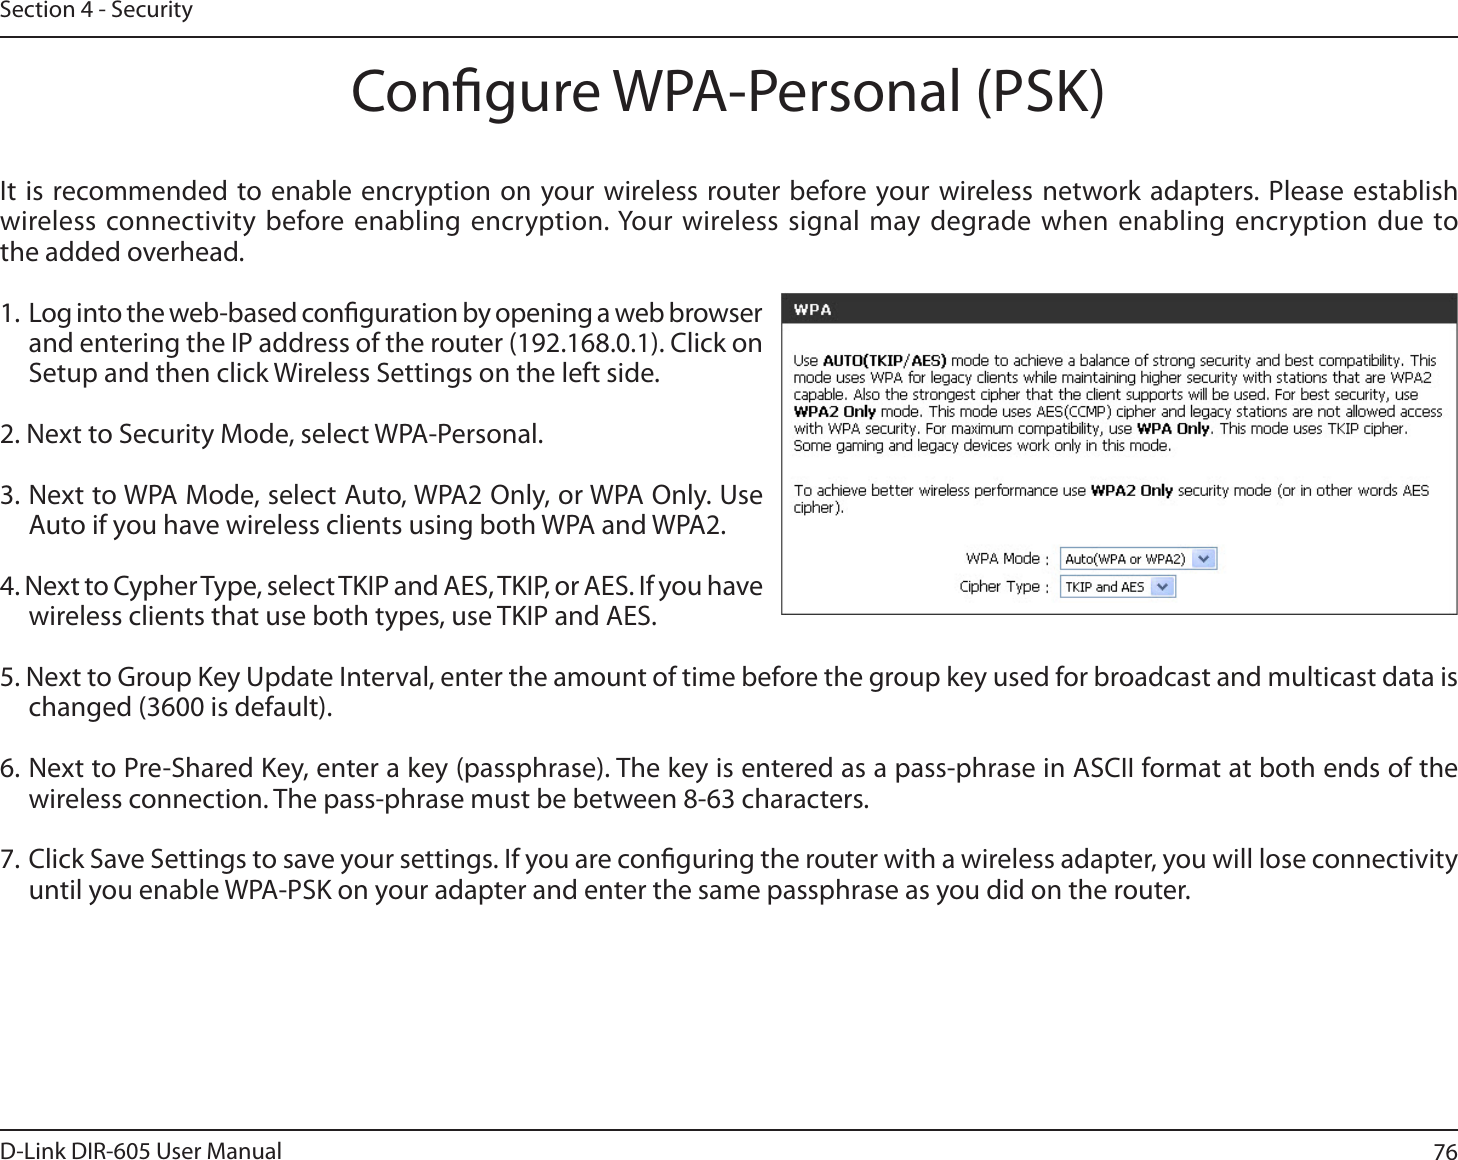 76D-Link DIR-605 User ManualSection 4 - SecurityCongure WPA-Personal (PSK)It is recommended to enable encryption on your wireless router before your wireless network adapters. Please establish XJSFMFTTDPOOFDUJWJUZ CFGPSFFOBCMJOHFODSZQUJPO:PVSXJSFMFTTTJHOBMNBZEFHSBEFXIFOFOBCMJOH FODSZQUJPOEVFUPthe added overhead.1. Log into the web-based conguration by opening a web browser and entering the IP address of the router (192.168.0.1). Click onSetup and then click Wireless Settings on the left side.2. Next to Security Mode, select WPA-Personal.3. Next to WPA Mode, select Auto, WPA2 Only, or WPA Only. Use Auto if you have wireless clients using both WPA and WPA2.4. Next to Cypher Type, select TKIP and AES, TKIP, or AES. If you have wireless clients that use both types, use TKIP and AES.5. Next to Group Key Update Interval, enter the amount of time before the group key used for broadcast and multicast data is changed (3600 is default).6. Next to Pre-Shared Key, enter a key (passphrase). The key is entered as a pass-phrase in ASCII format at both ends of the wireless connection. The pass-phrase must be between 8-63 characters. 7. Click Save Settings to save your settings. If you are conguring the router with a wireless adapter, you will lose connectivity until you enable WPA-PSK on your adapter and enter the same passphrase as you did on the router.